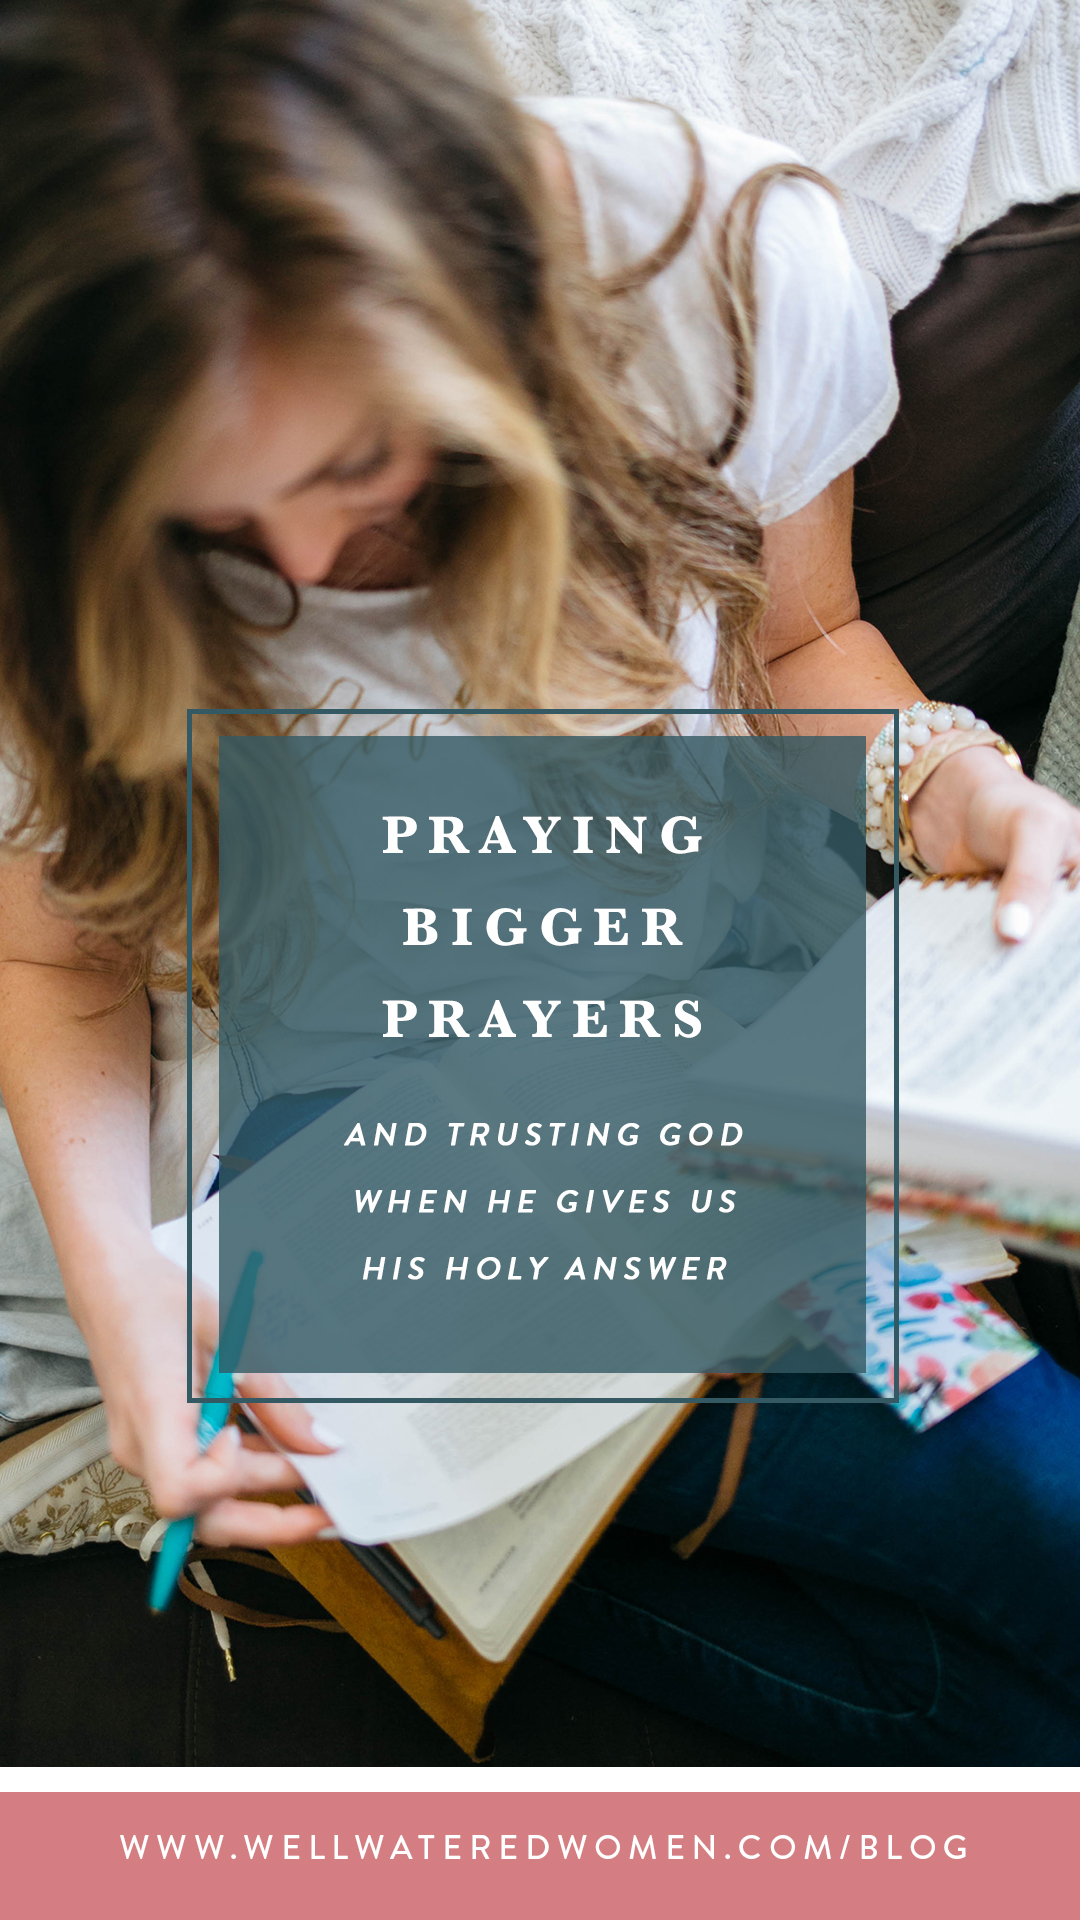 Praying Bigger Prayers and TRUSTING God when he answers.